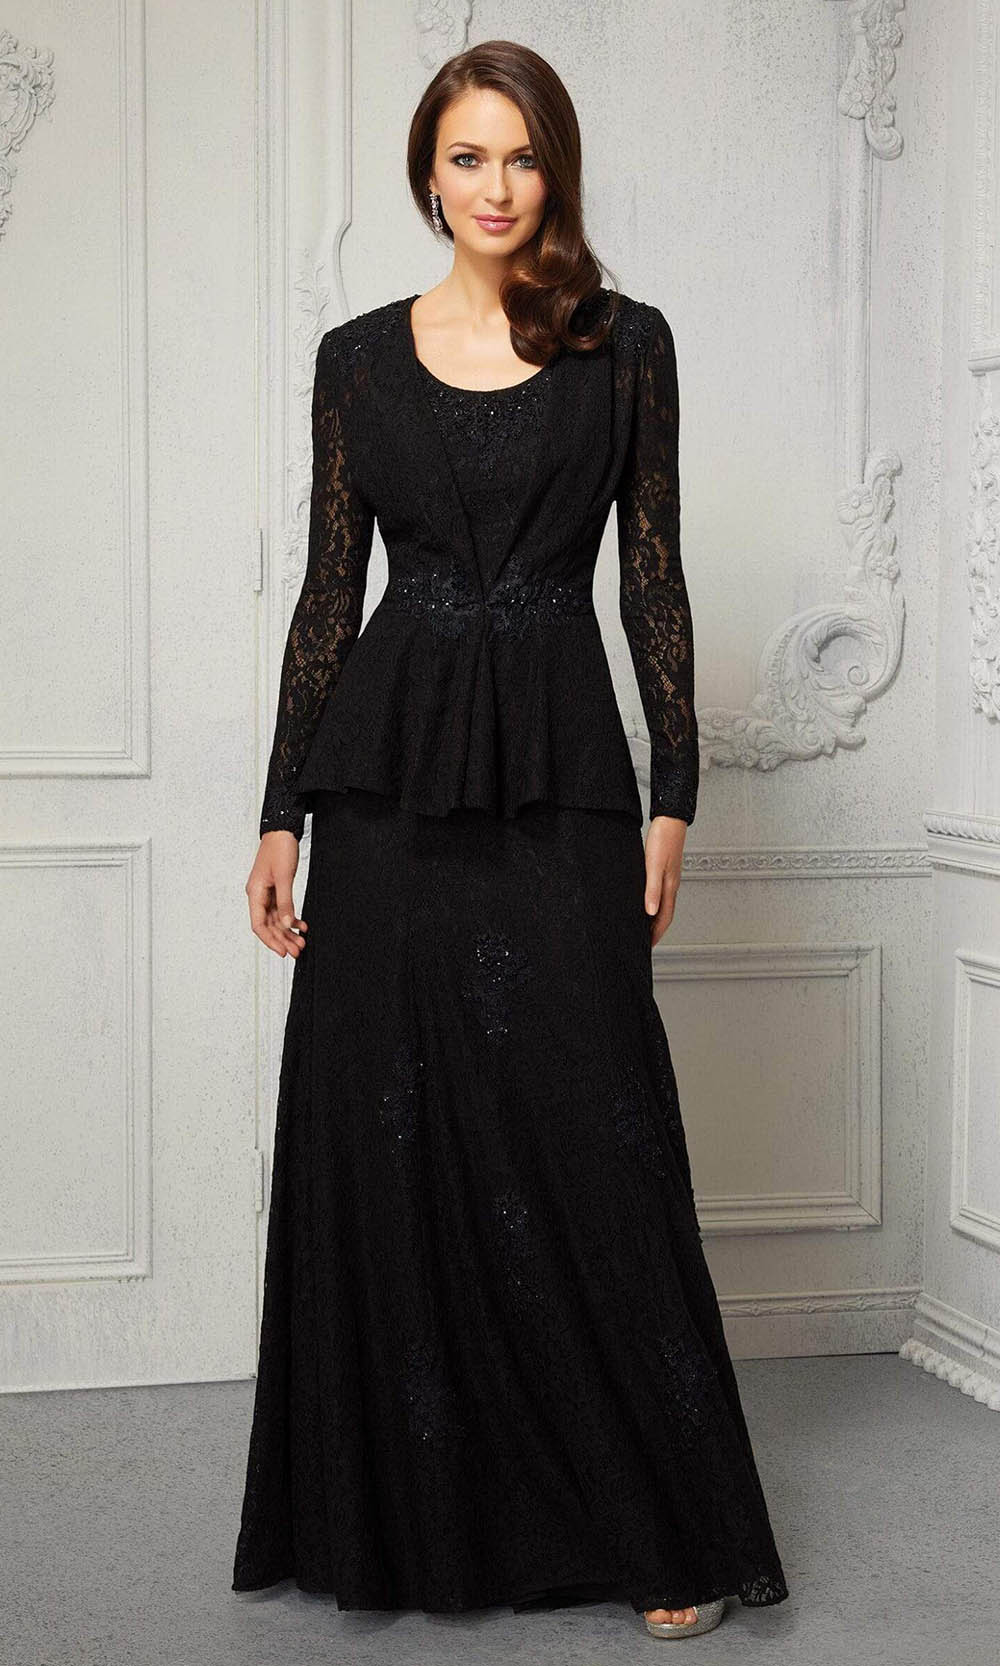 MGNY By Mori Lee - 72422 Two Piece Formal Lace Evening Dress Evening Dresses 00 / Black